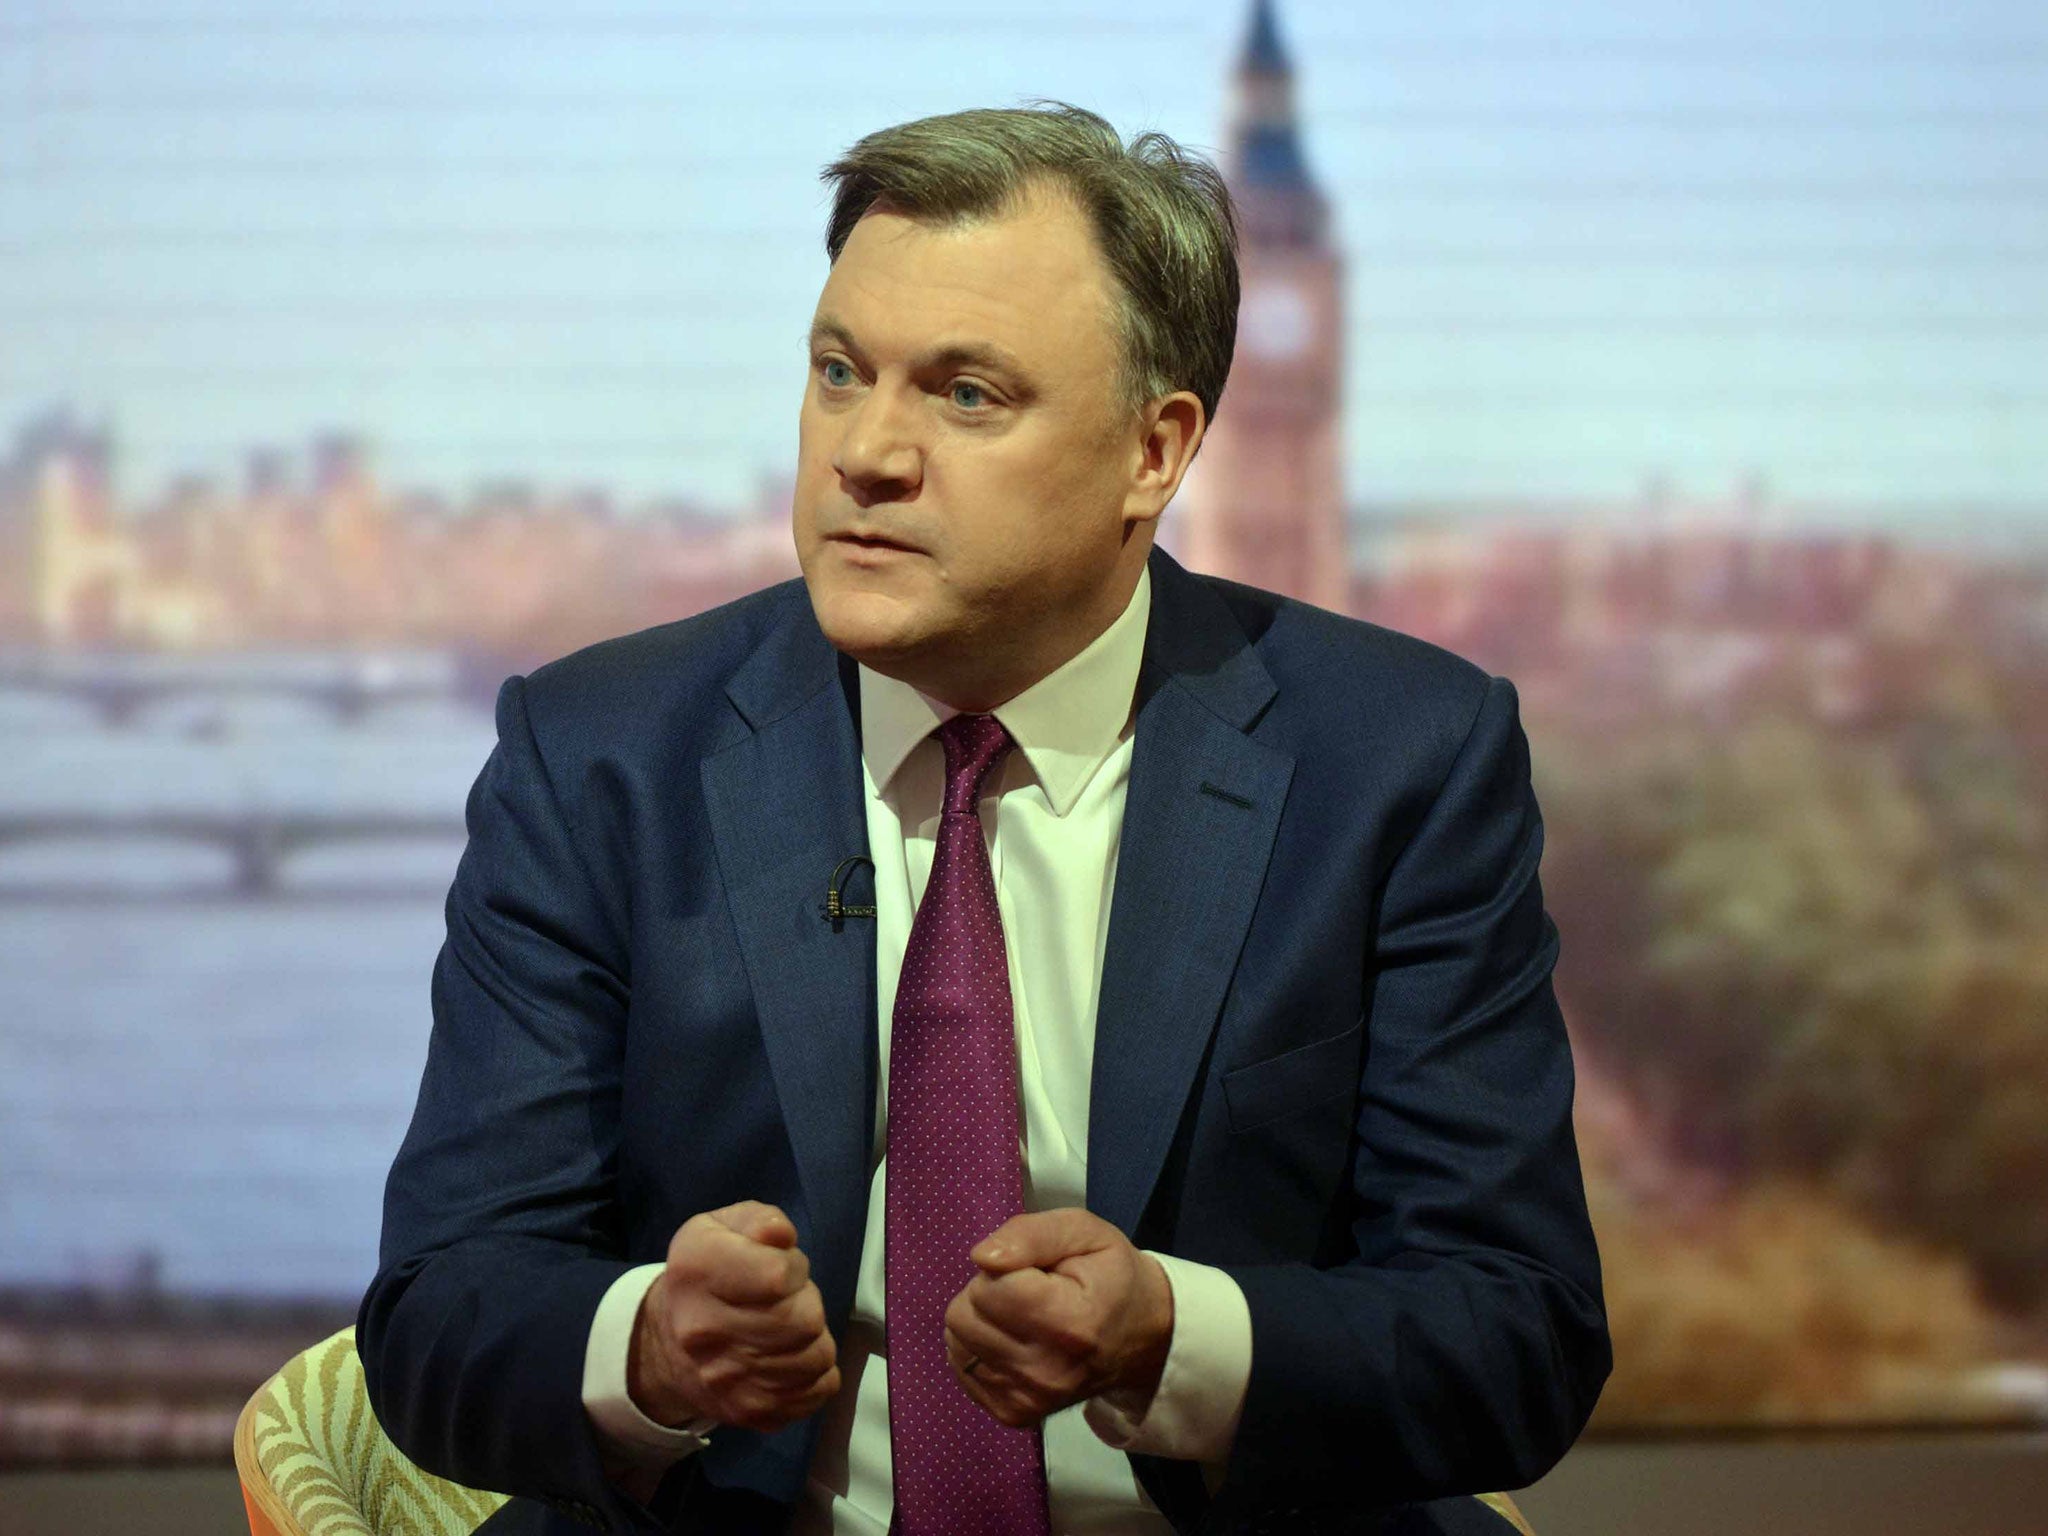 Shadow Chancellor of the Exchequer Ed Balls appears on The Andrew Marr Show on March 15, 2015